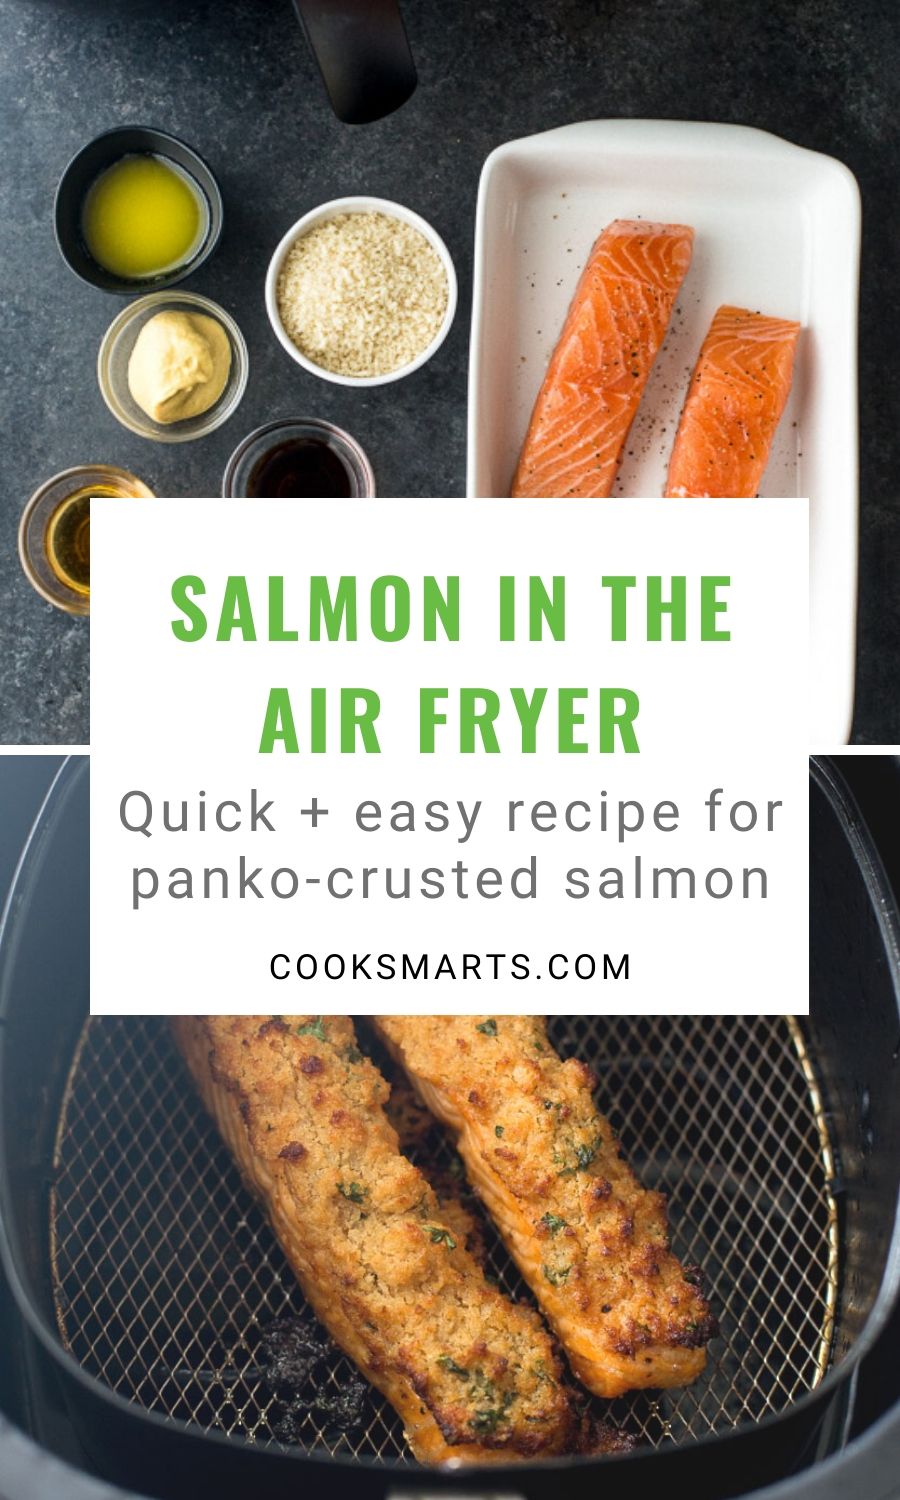 Air Fryer Salmon with Panko Crust Recipe | Cook Smarts